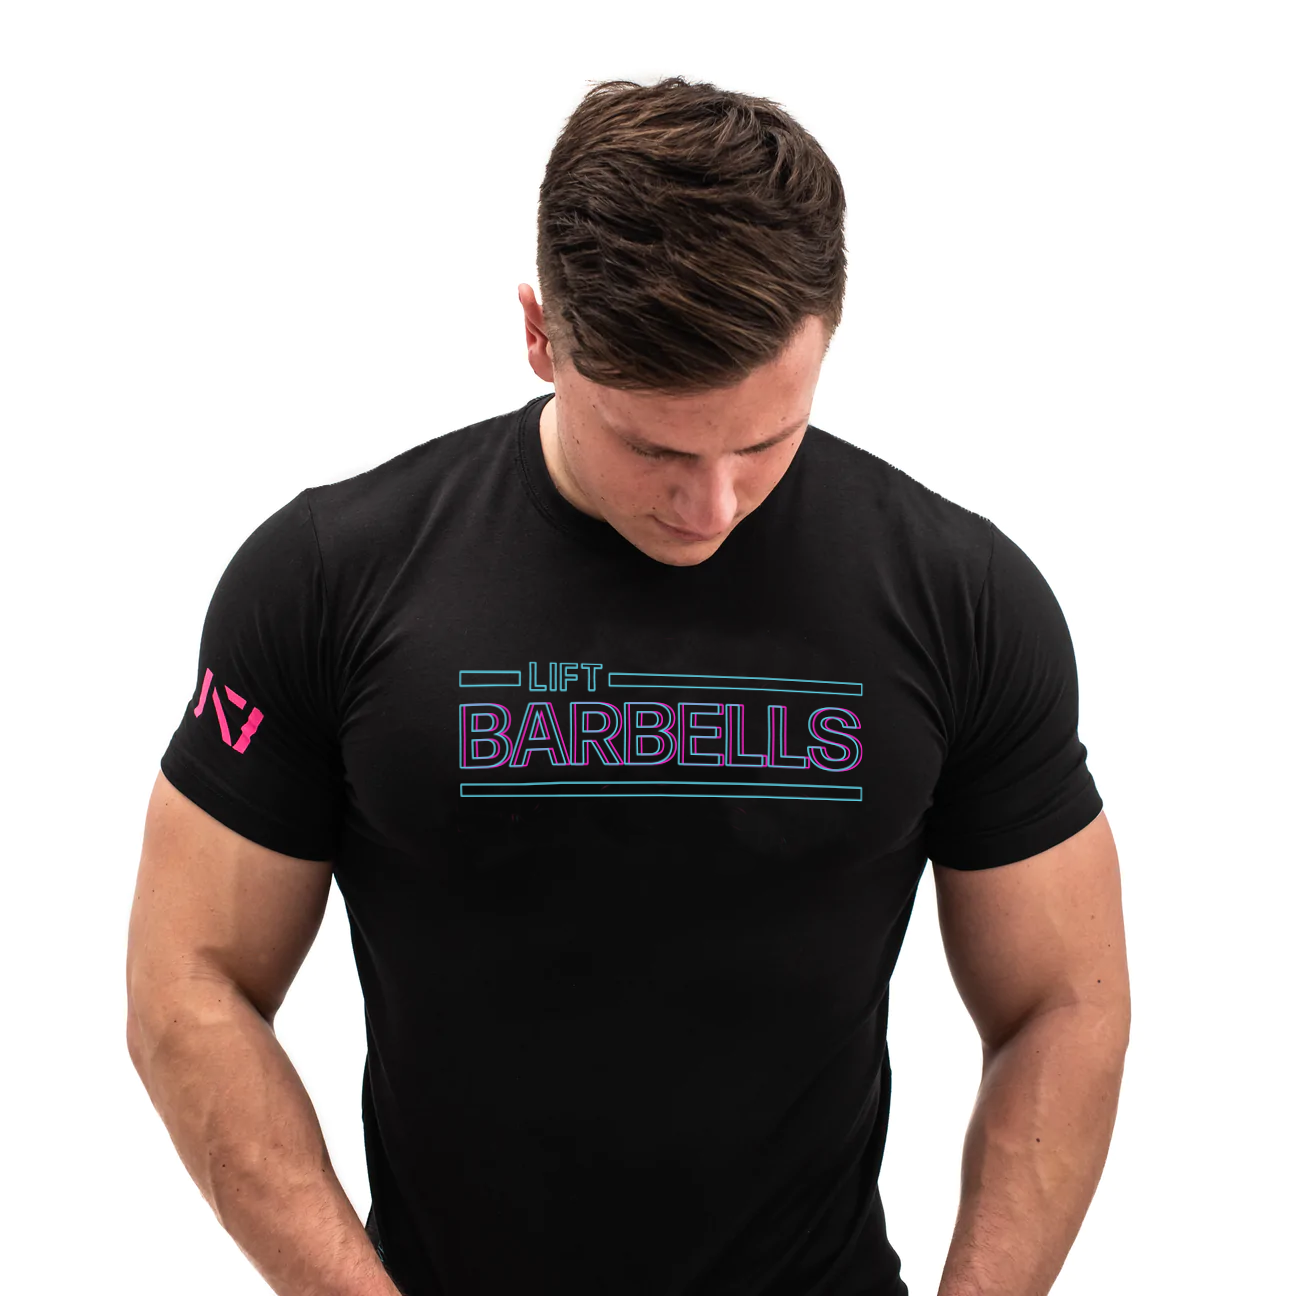 The Lift Bar Grip Shirt reminds us of our focus in workouts – to Lift Barbells! The design features a fun pop of colour on the dark background. The Lift Bar Grip Shirt is great for powerlifters. Purchase Lift Bar Grip from A7 UK and A7 Europe. The silicone grip helps with slippery commercial benches and bars and anchors the barbell to your back. A7UK has the best Powerlifting apparel for all workouts. Available in UK and Europe including France, Italy, Germany, the Netherlands, Sweden and Poland.